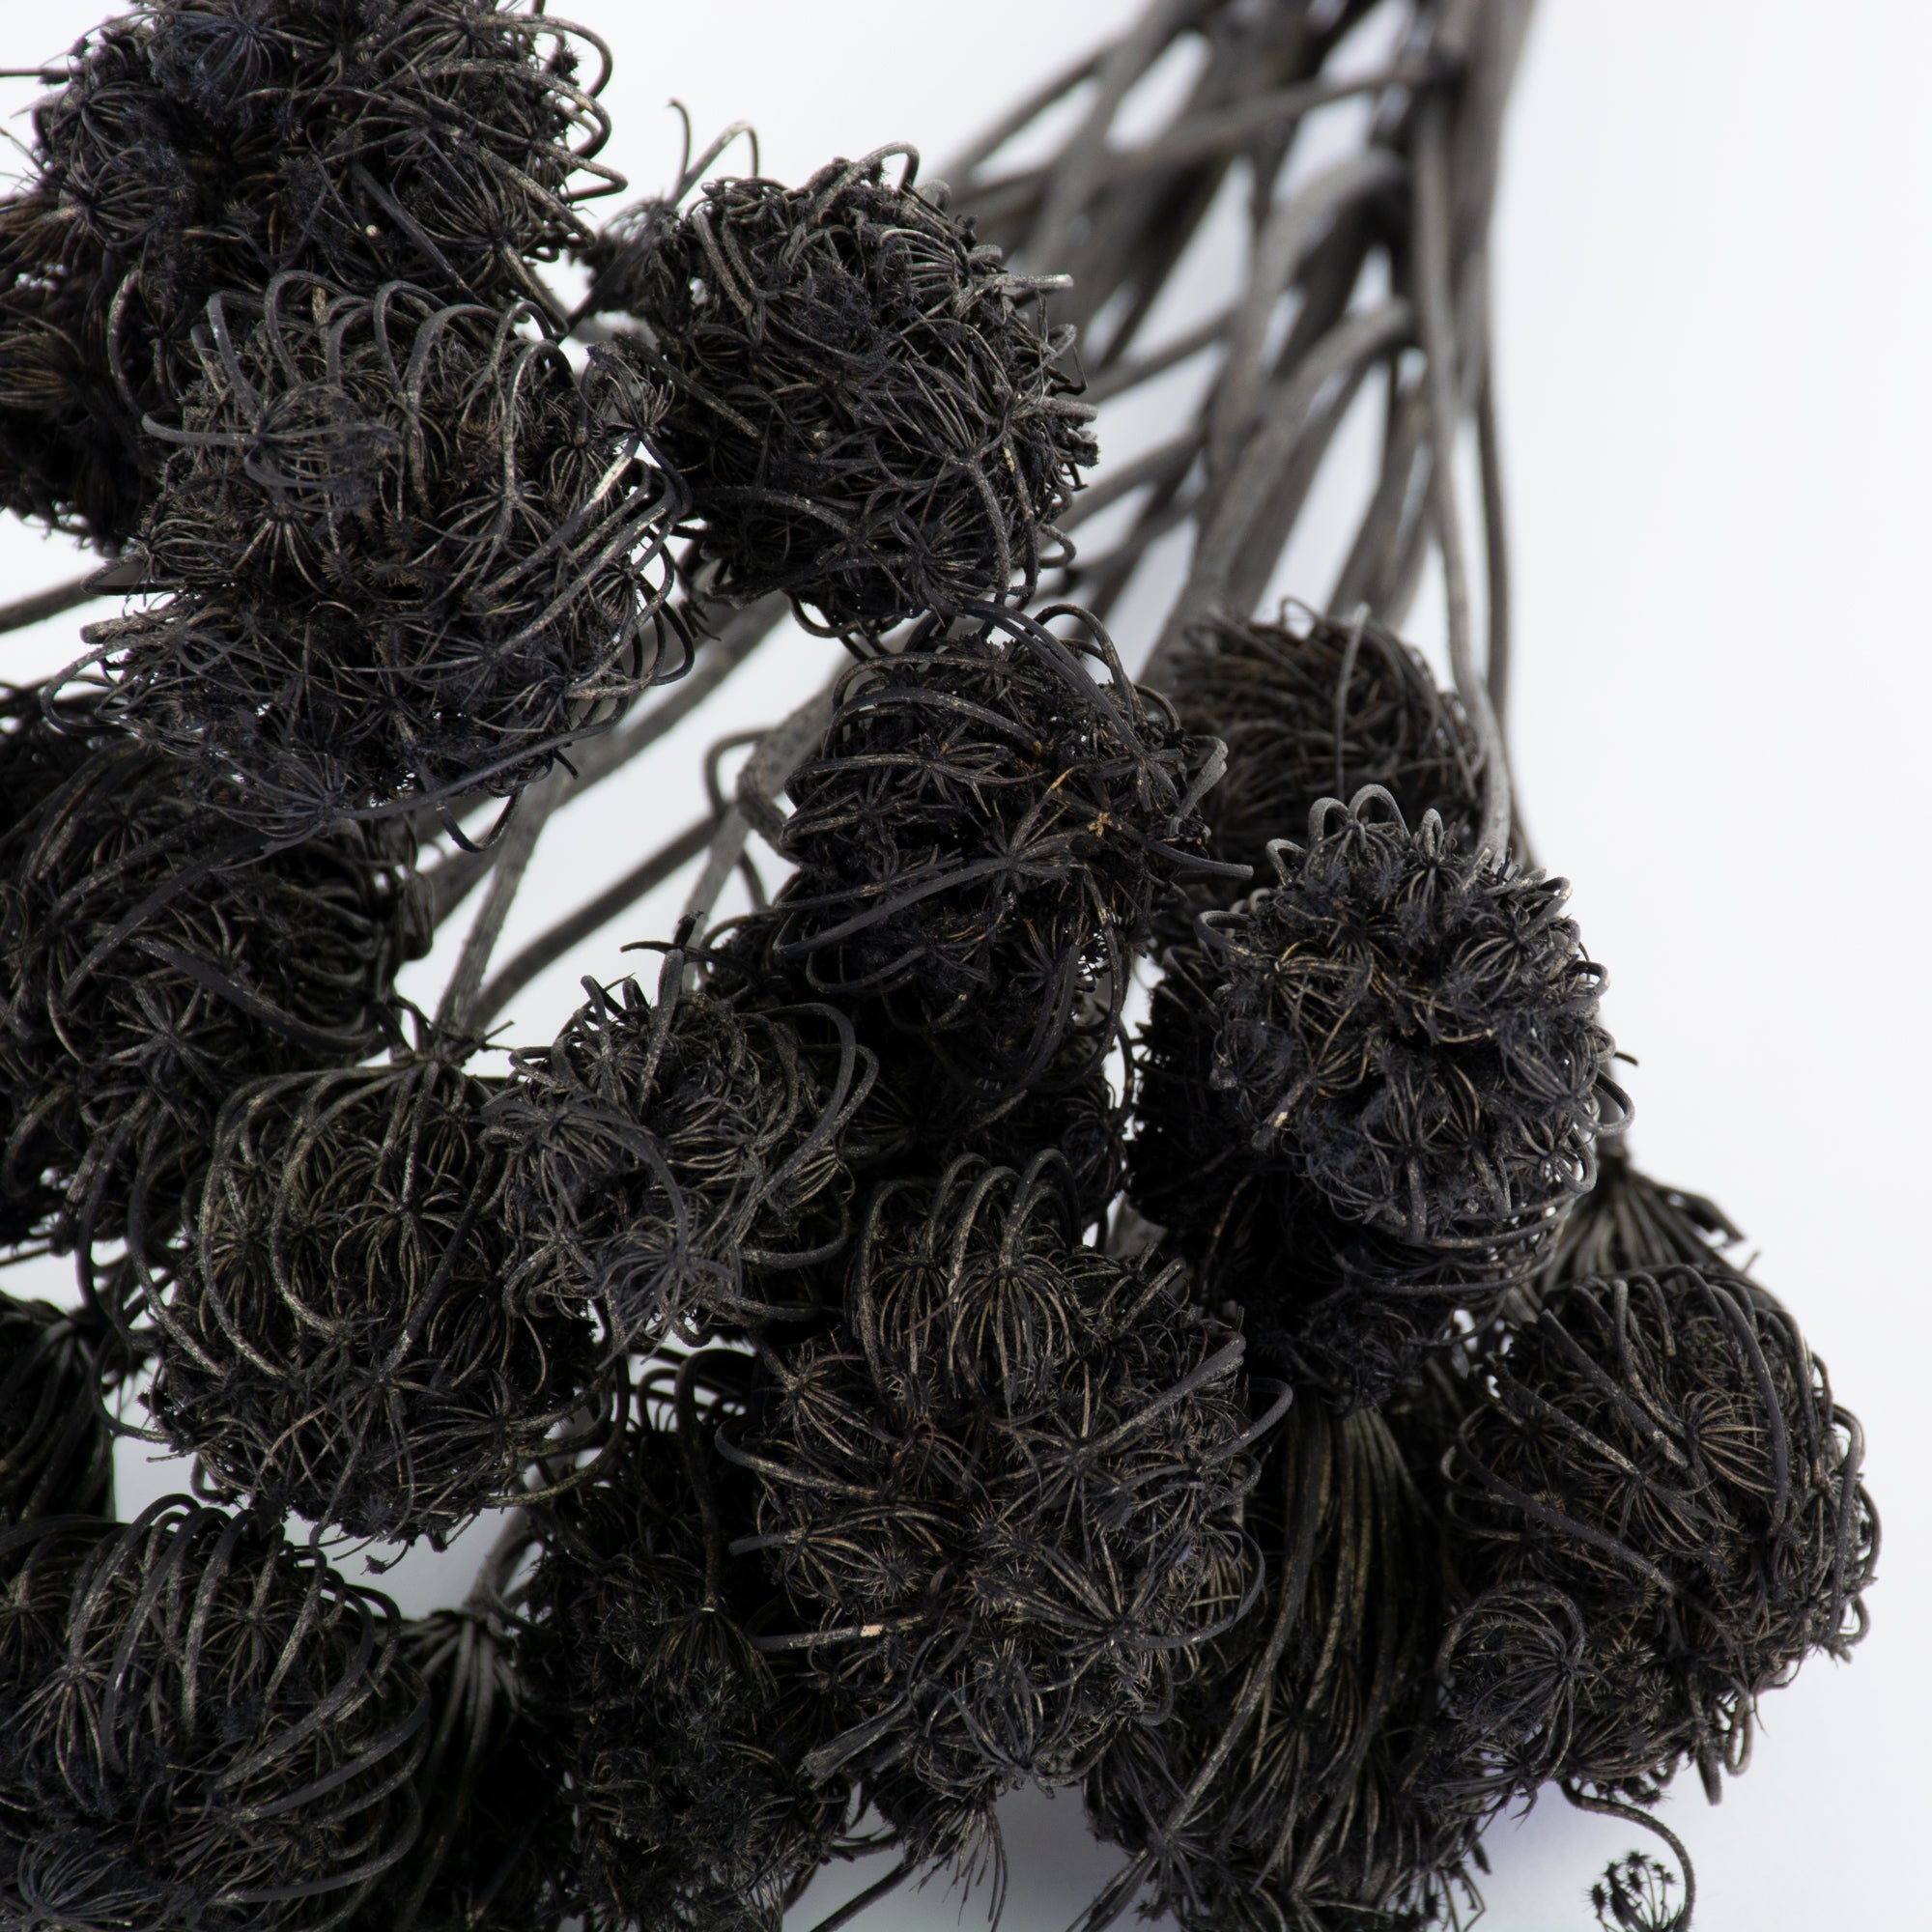 This is an image of a bunch of black painted ammi majus, laid on a white background.